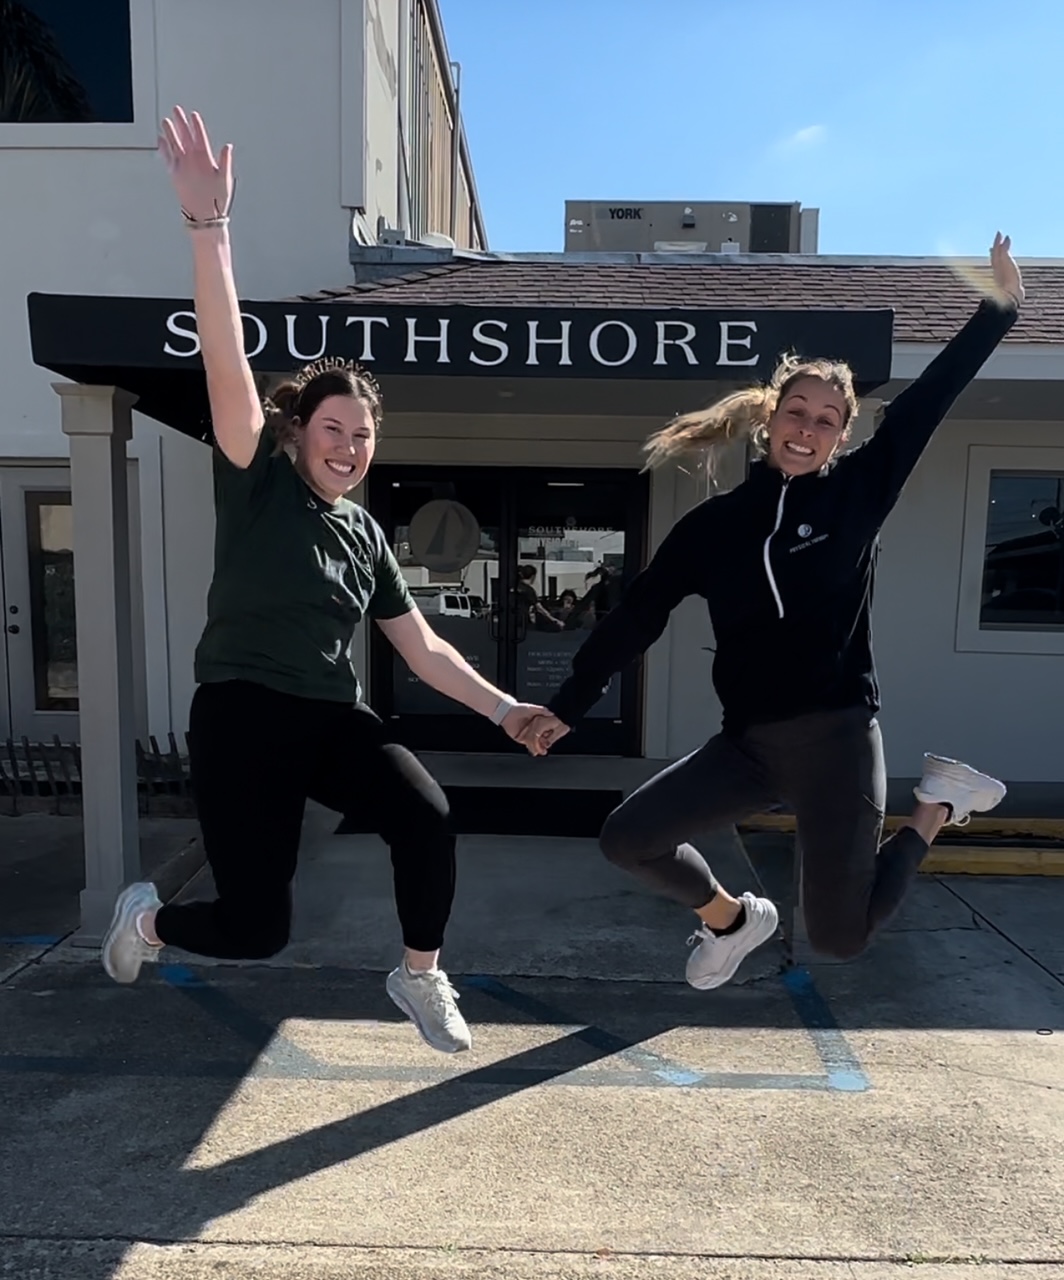 Southshore Physical Therapy, Metairie Louisiana, Danielle Williams, Ashley Harber, leaping